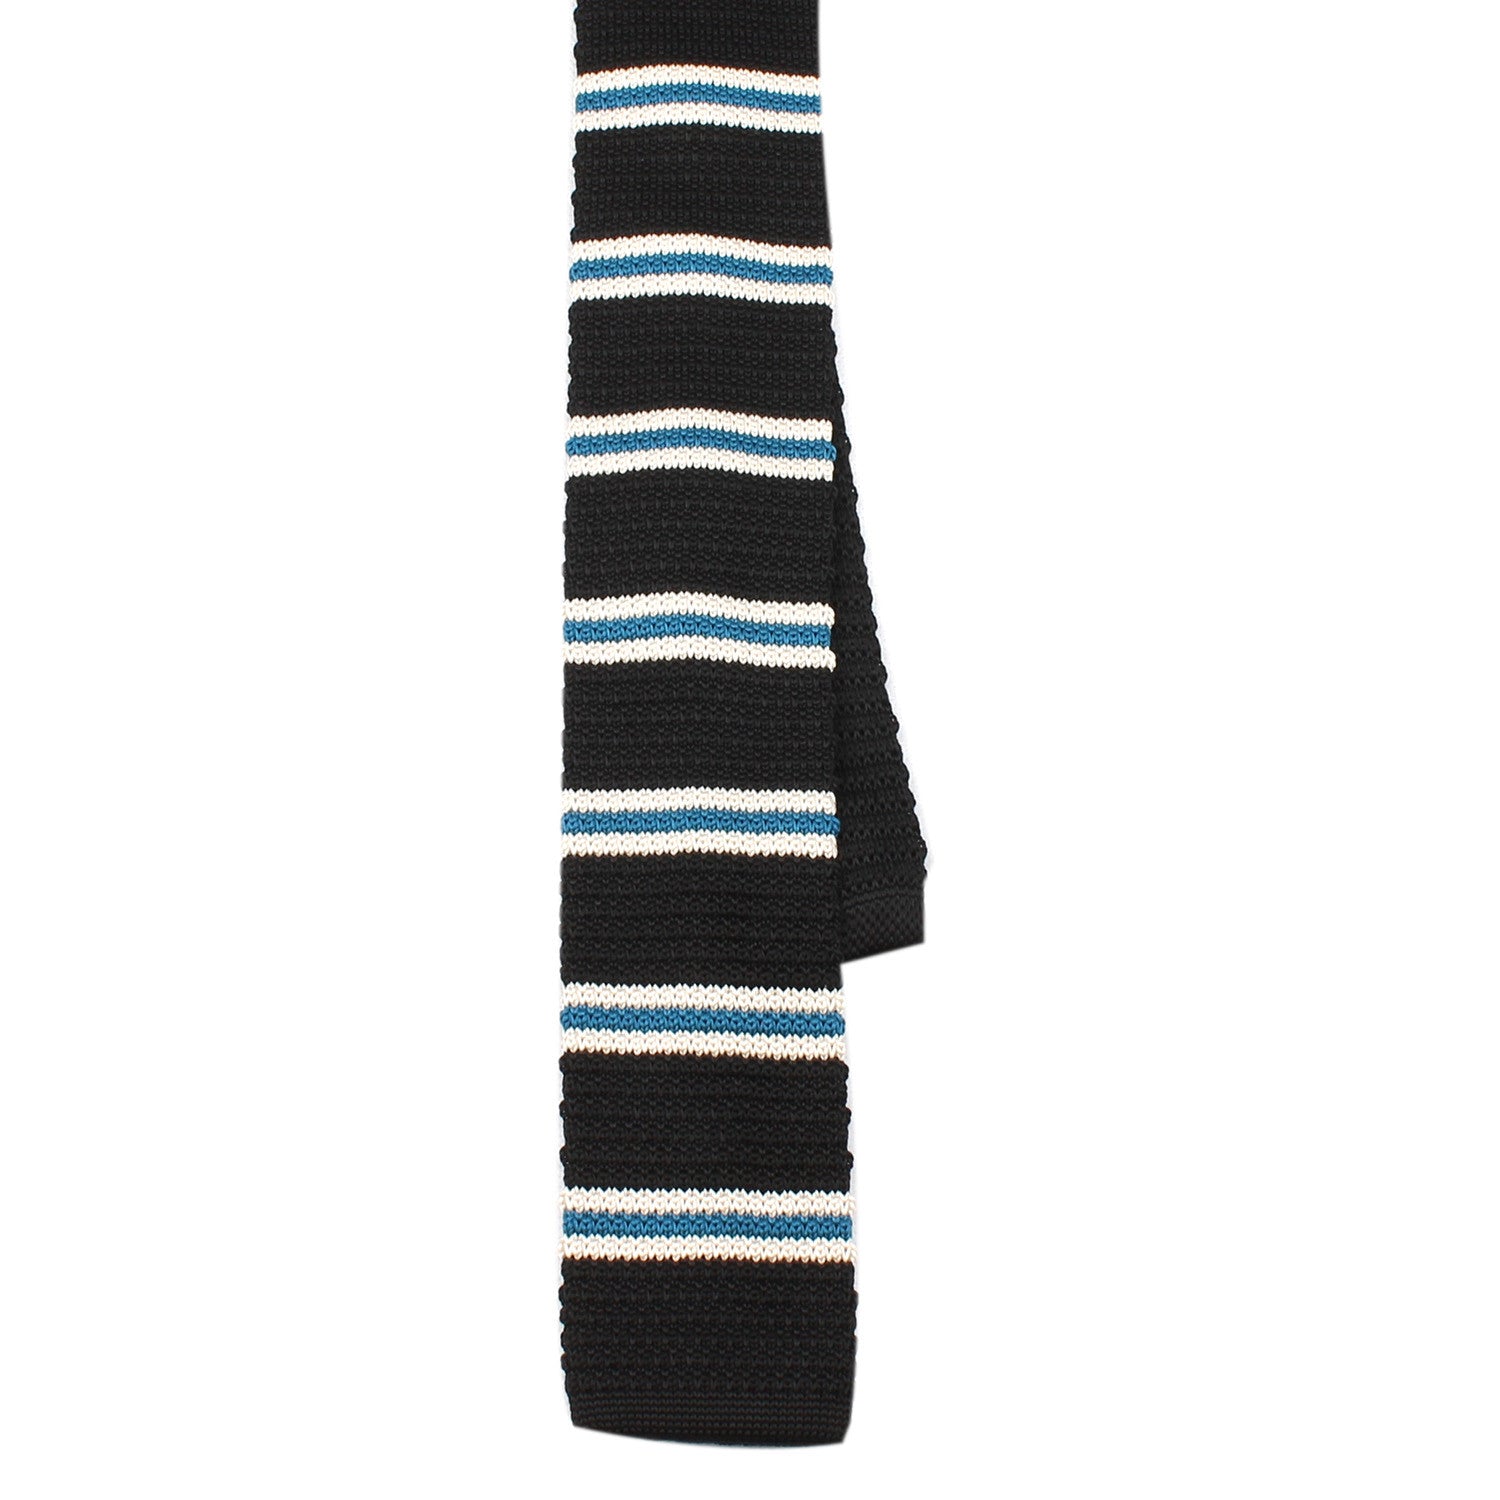 Black Knitted Tie with White & Blue Teal Stripes  Shape View